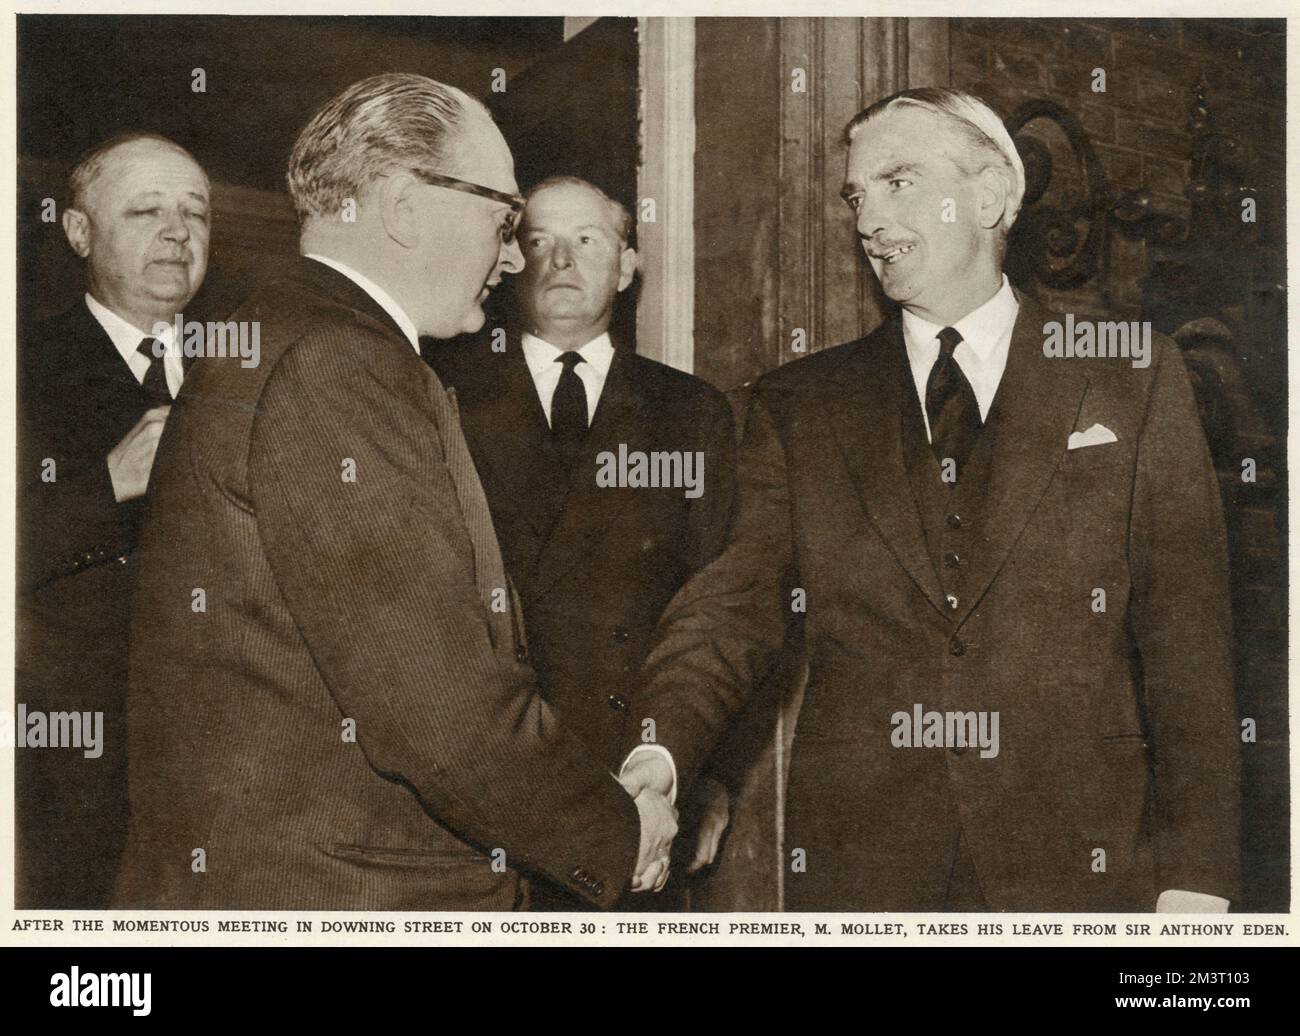 Sir Anthony Eden (right) shakes hands with French Premier Guy Alcide Mollet (1905-1975) - on 30th October 1956 outside number 10 Downing Street after discussions regarding Israel's invasion of Egypt. Stock Photo